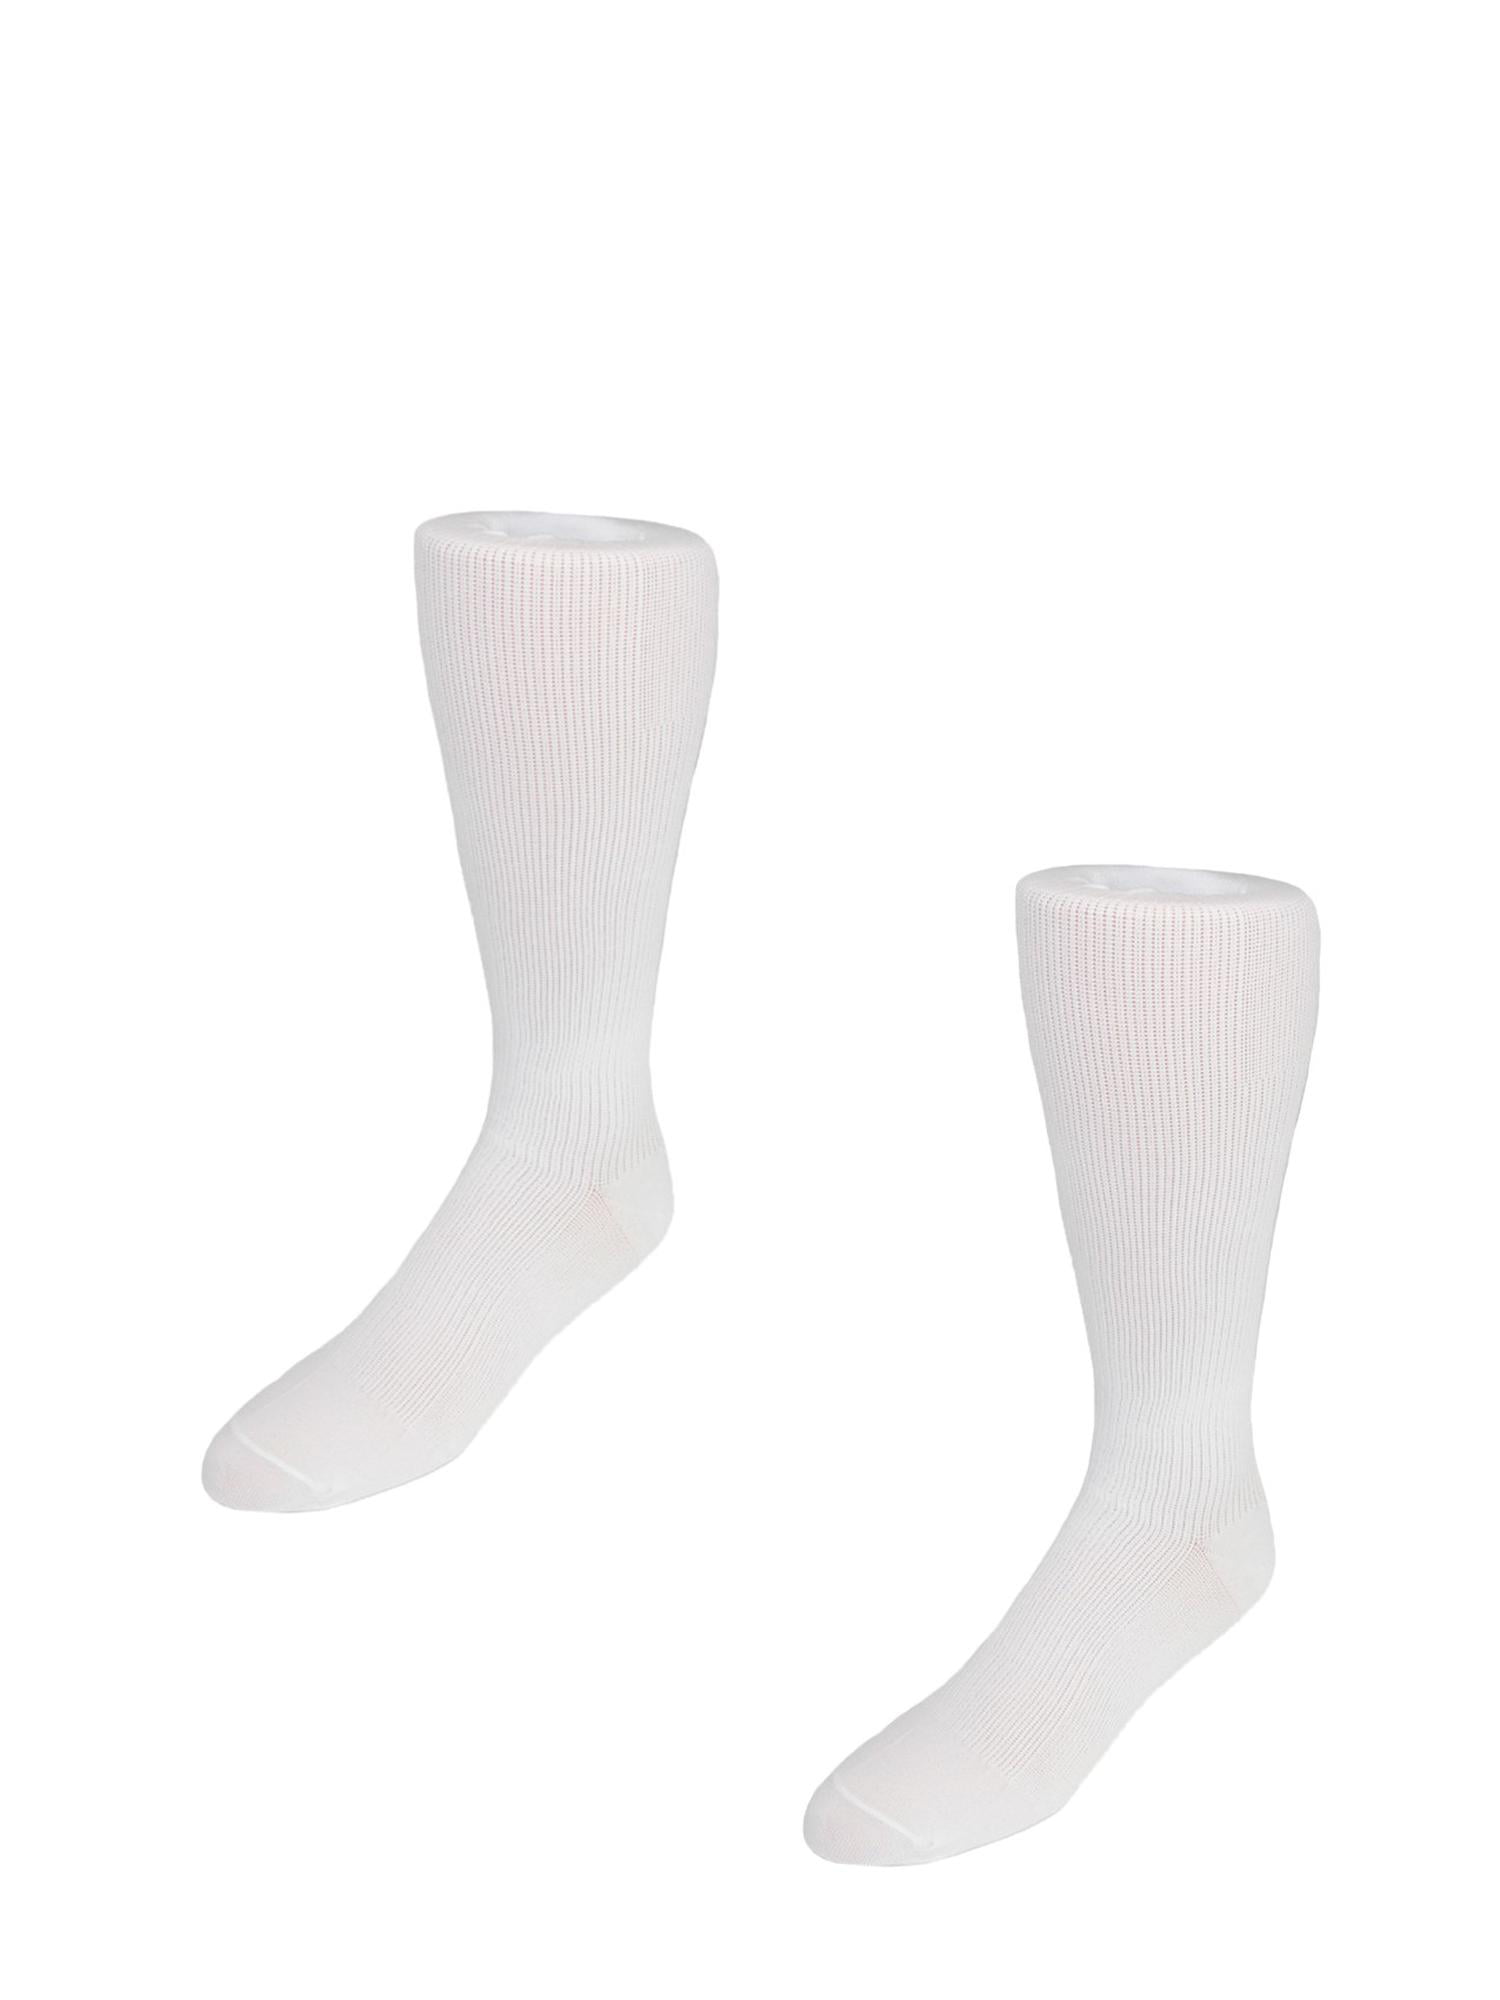 Pack of 2 Jefferies Socks Firm Support Over the Calf Compression Dress Socks 